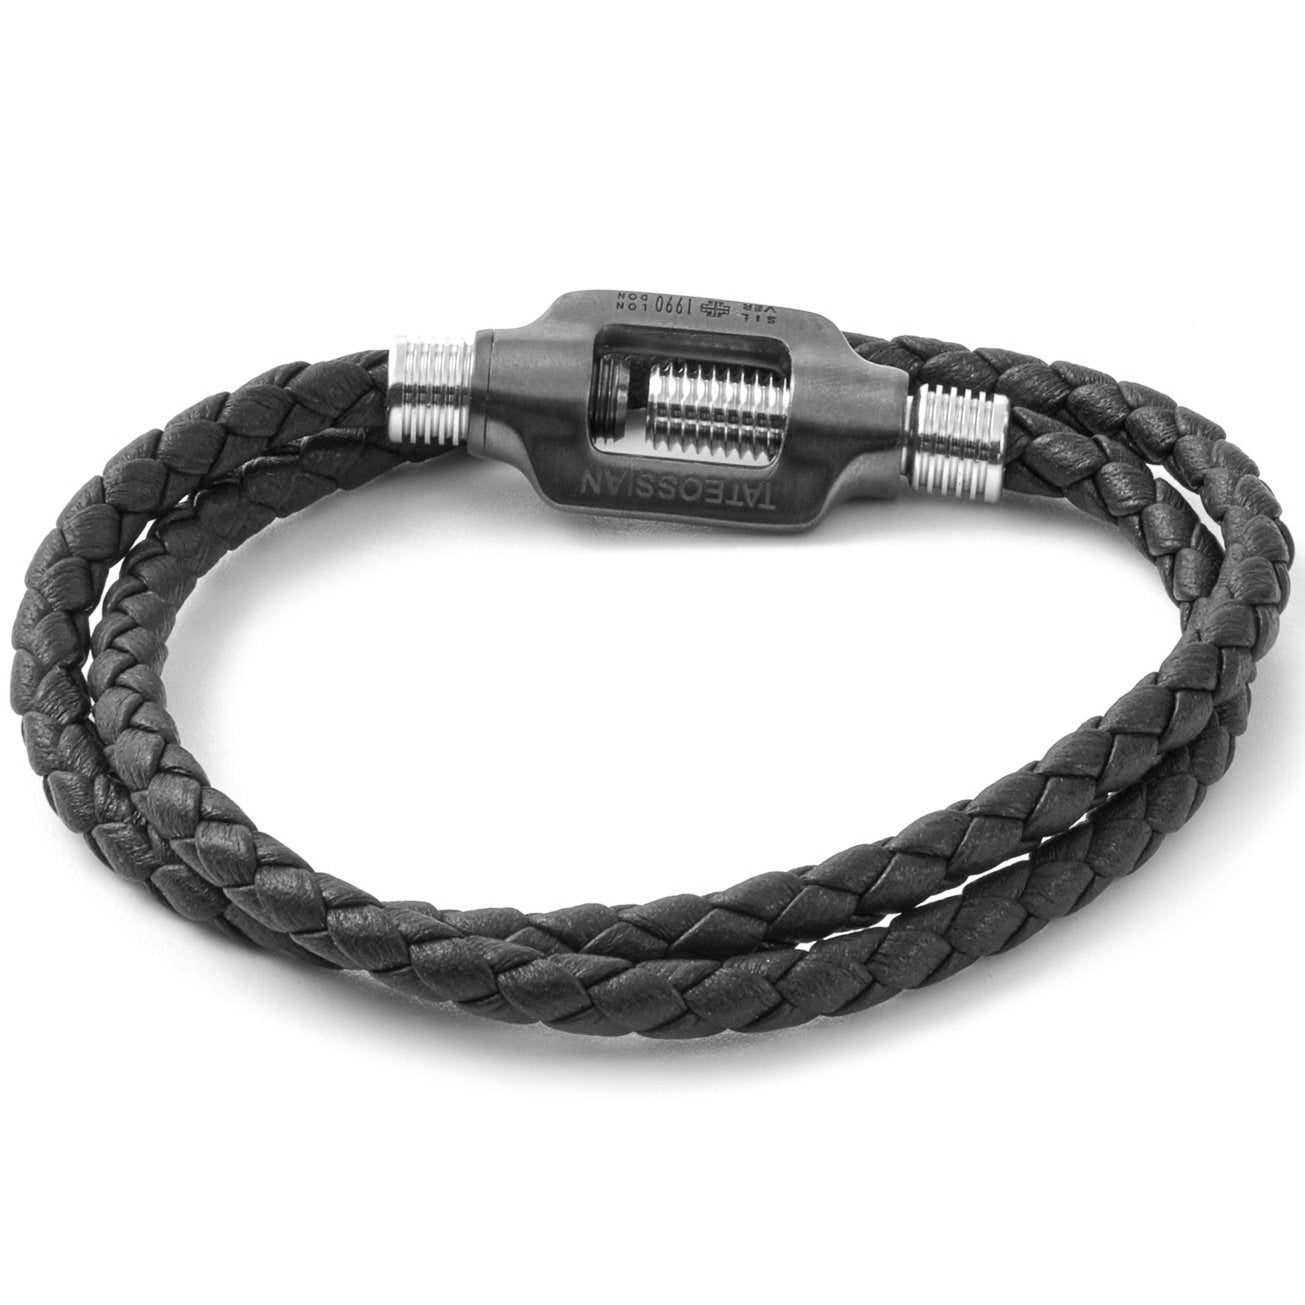 Tateossian Double Wrap Black Leather and Silver Bolt Bracelet